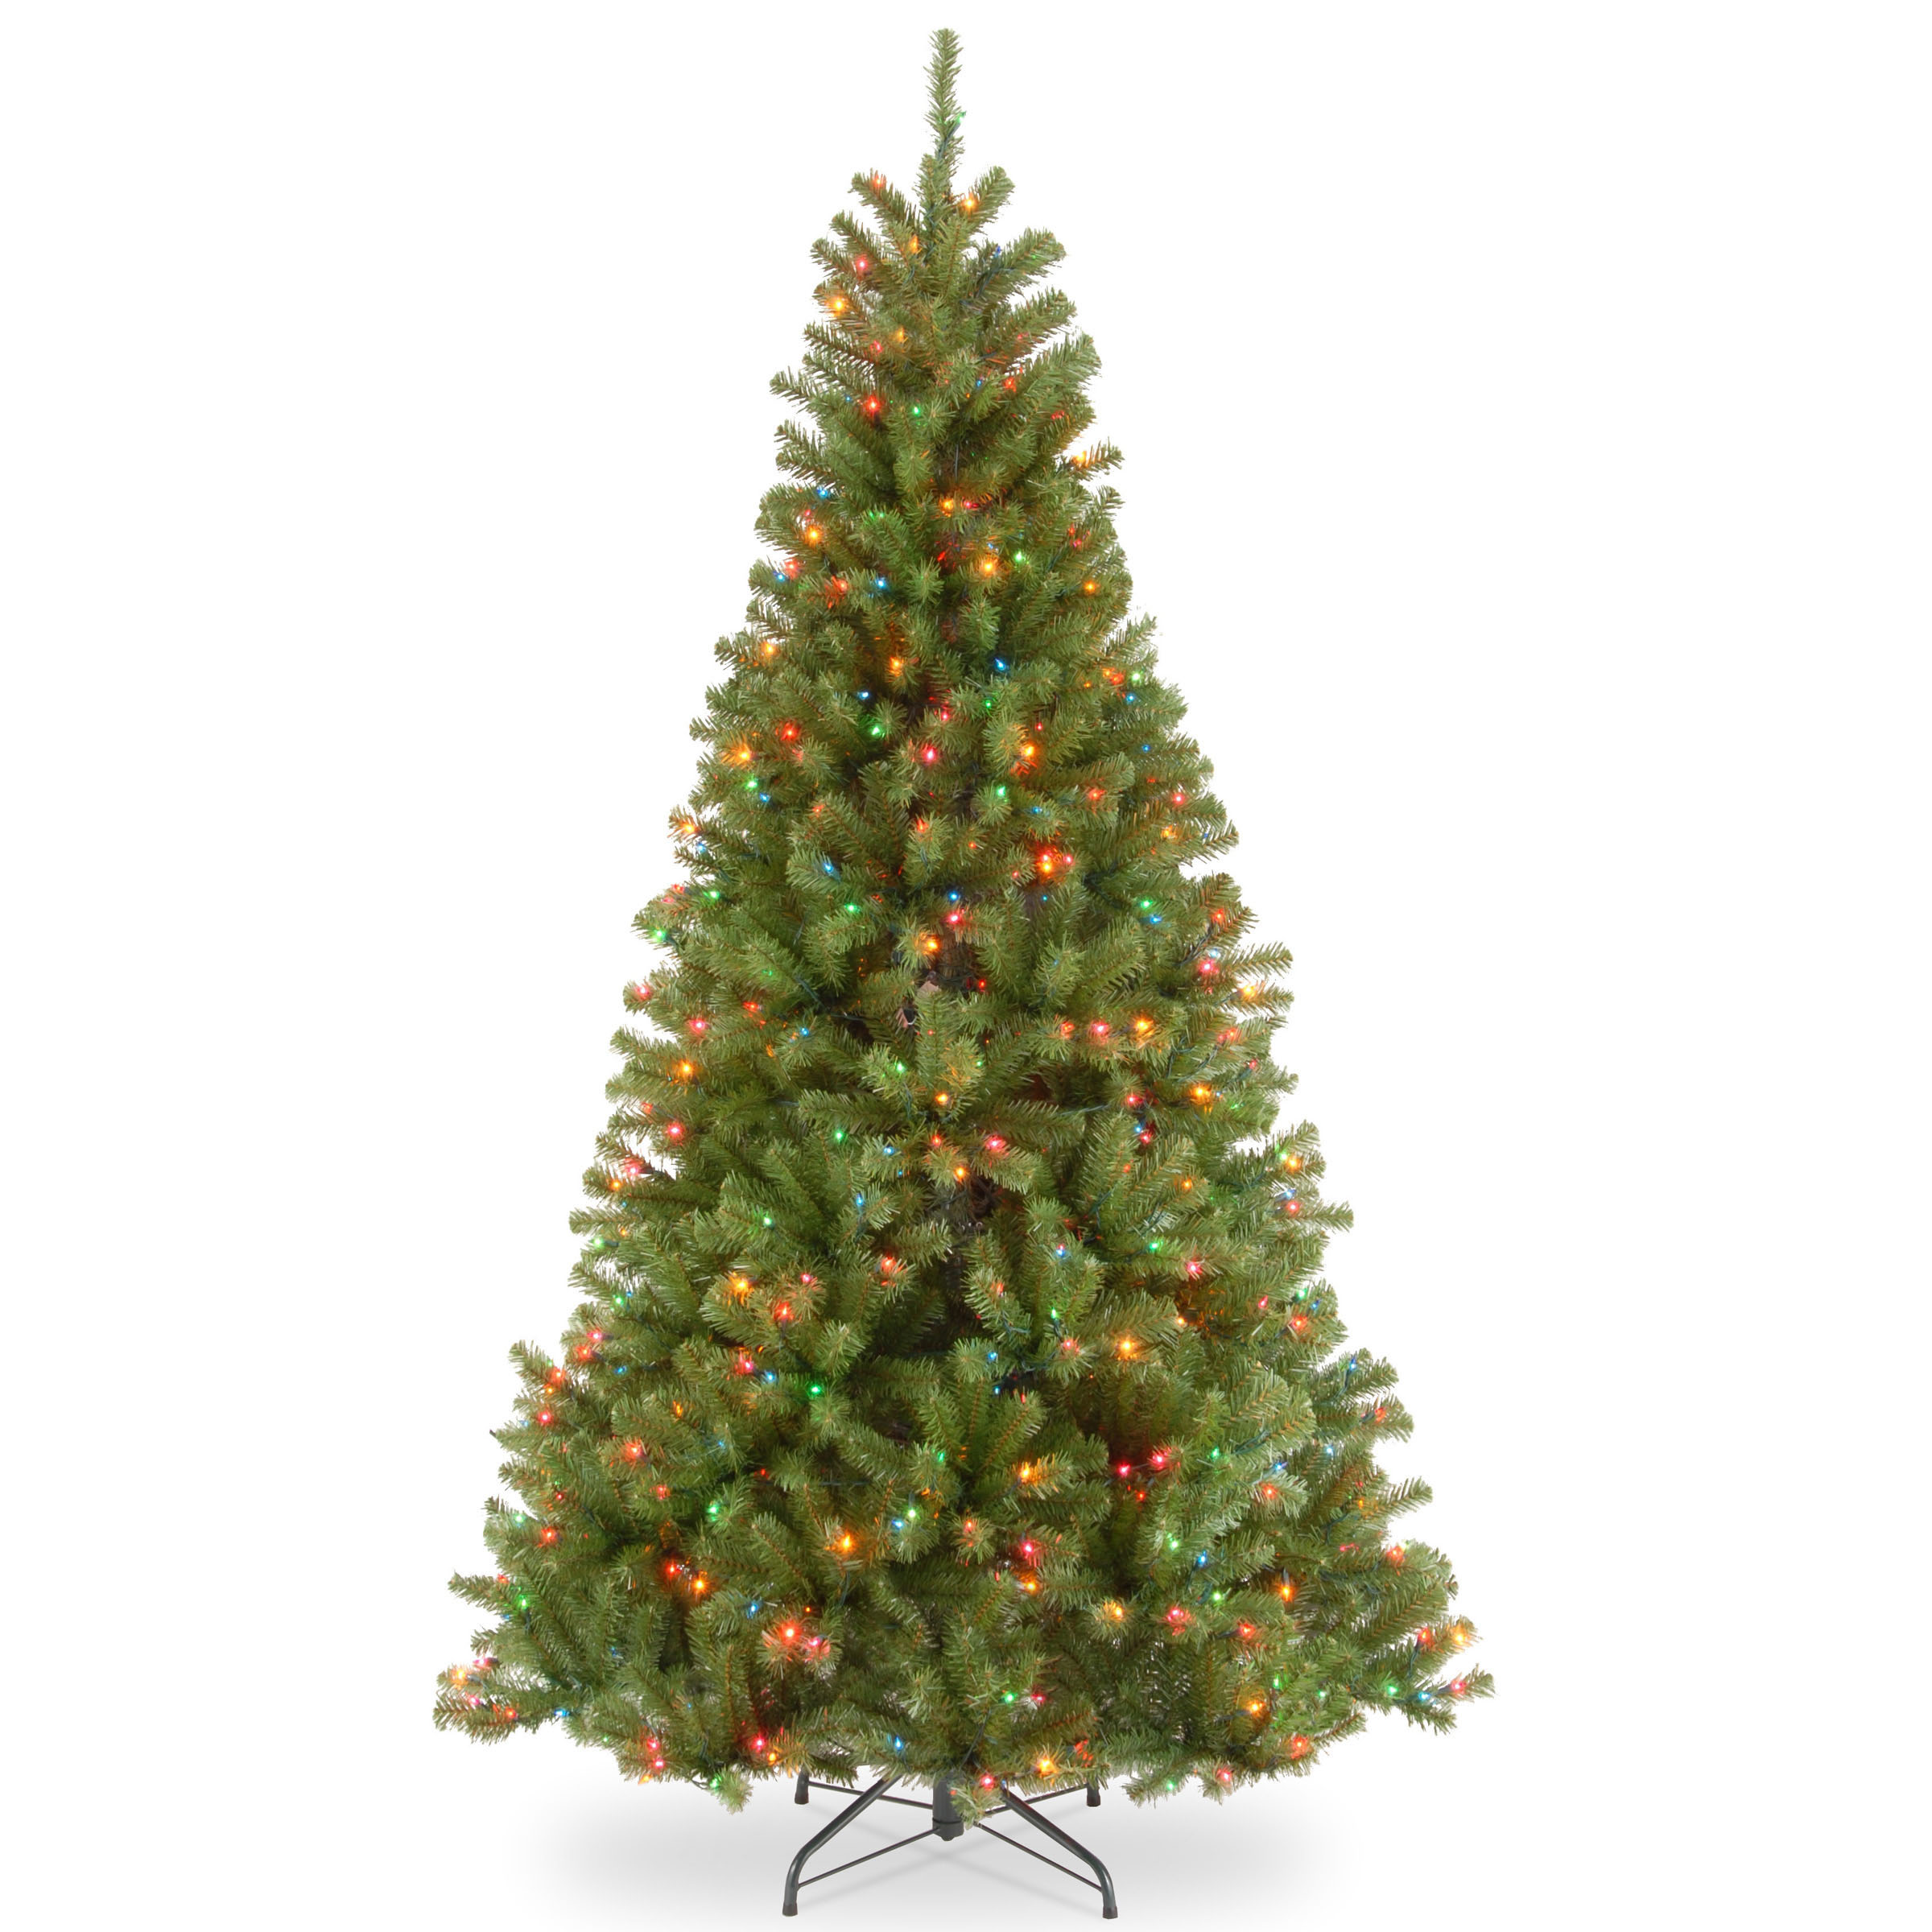 7 Foot North Valley Spruce Tree: Multi-colored Lights